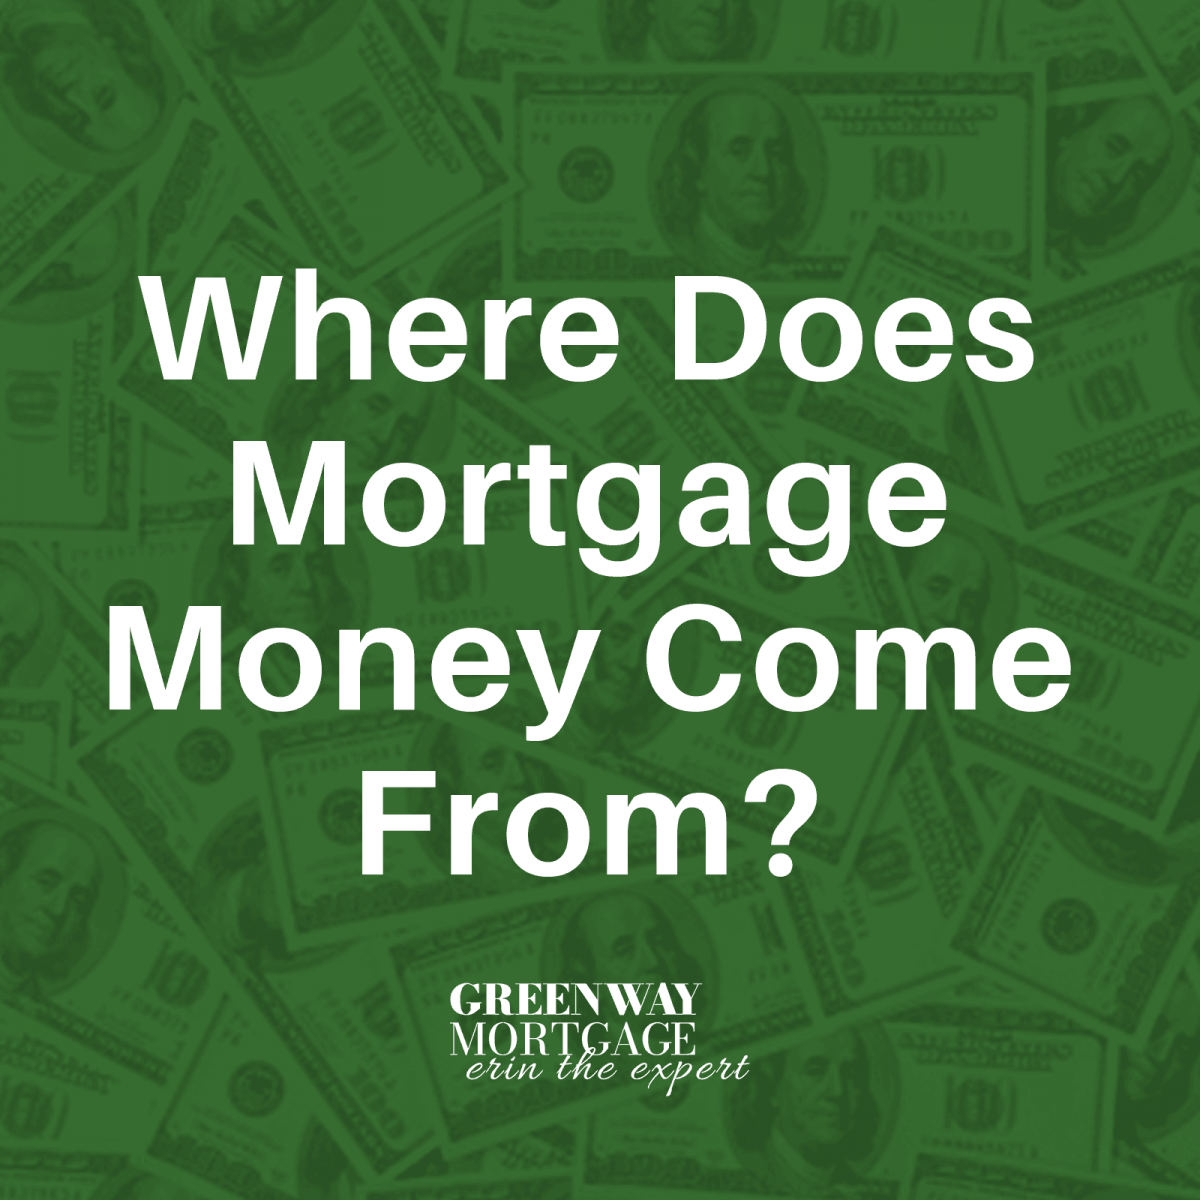 Where does mortgage money come from?